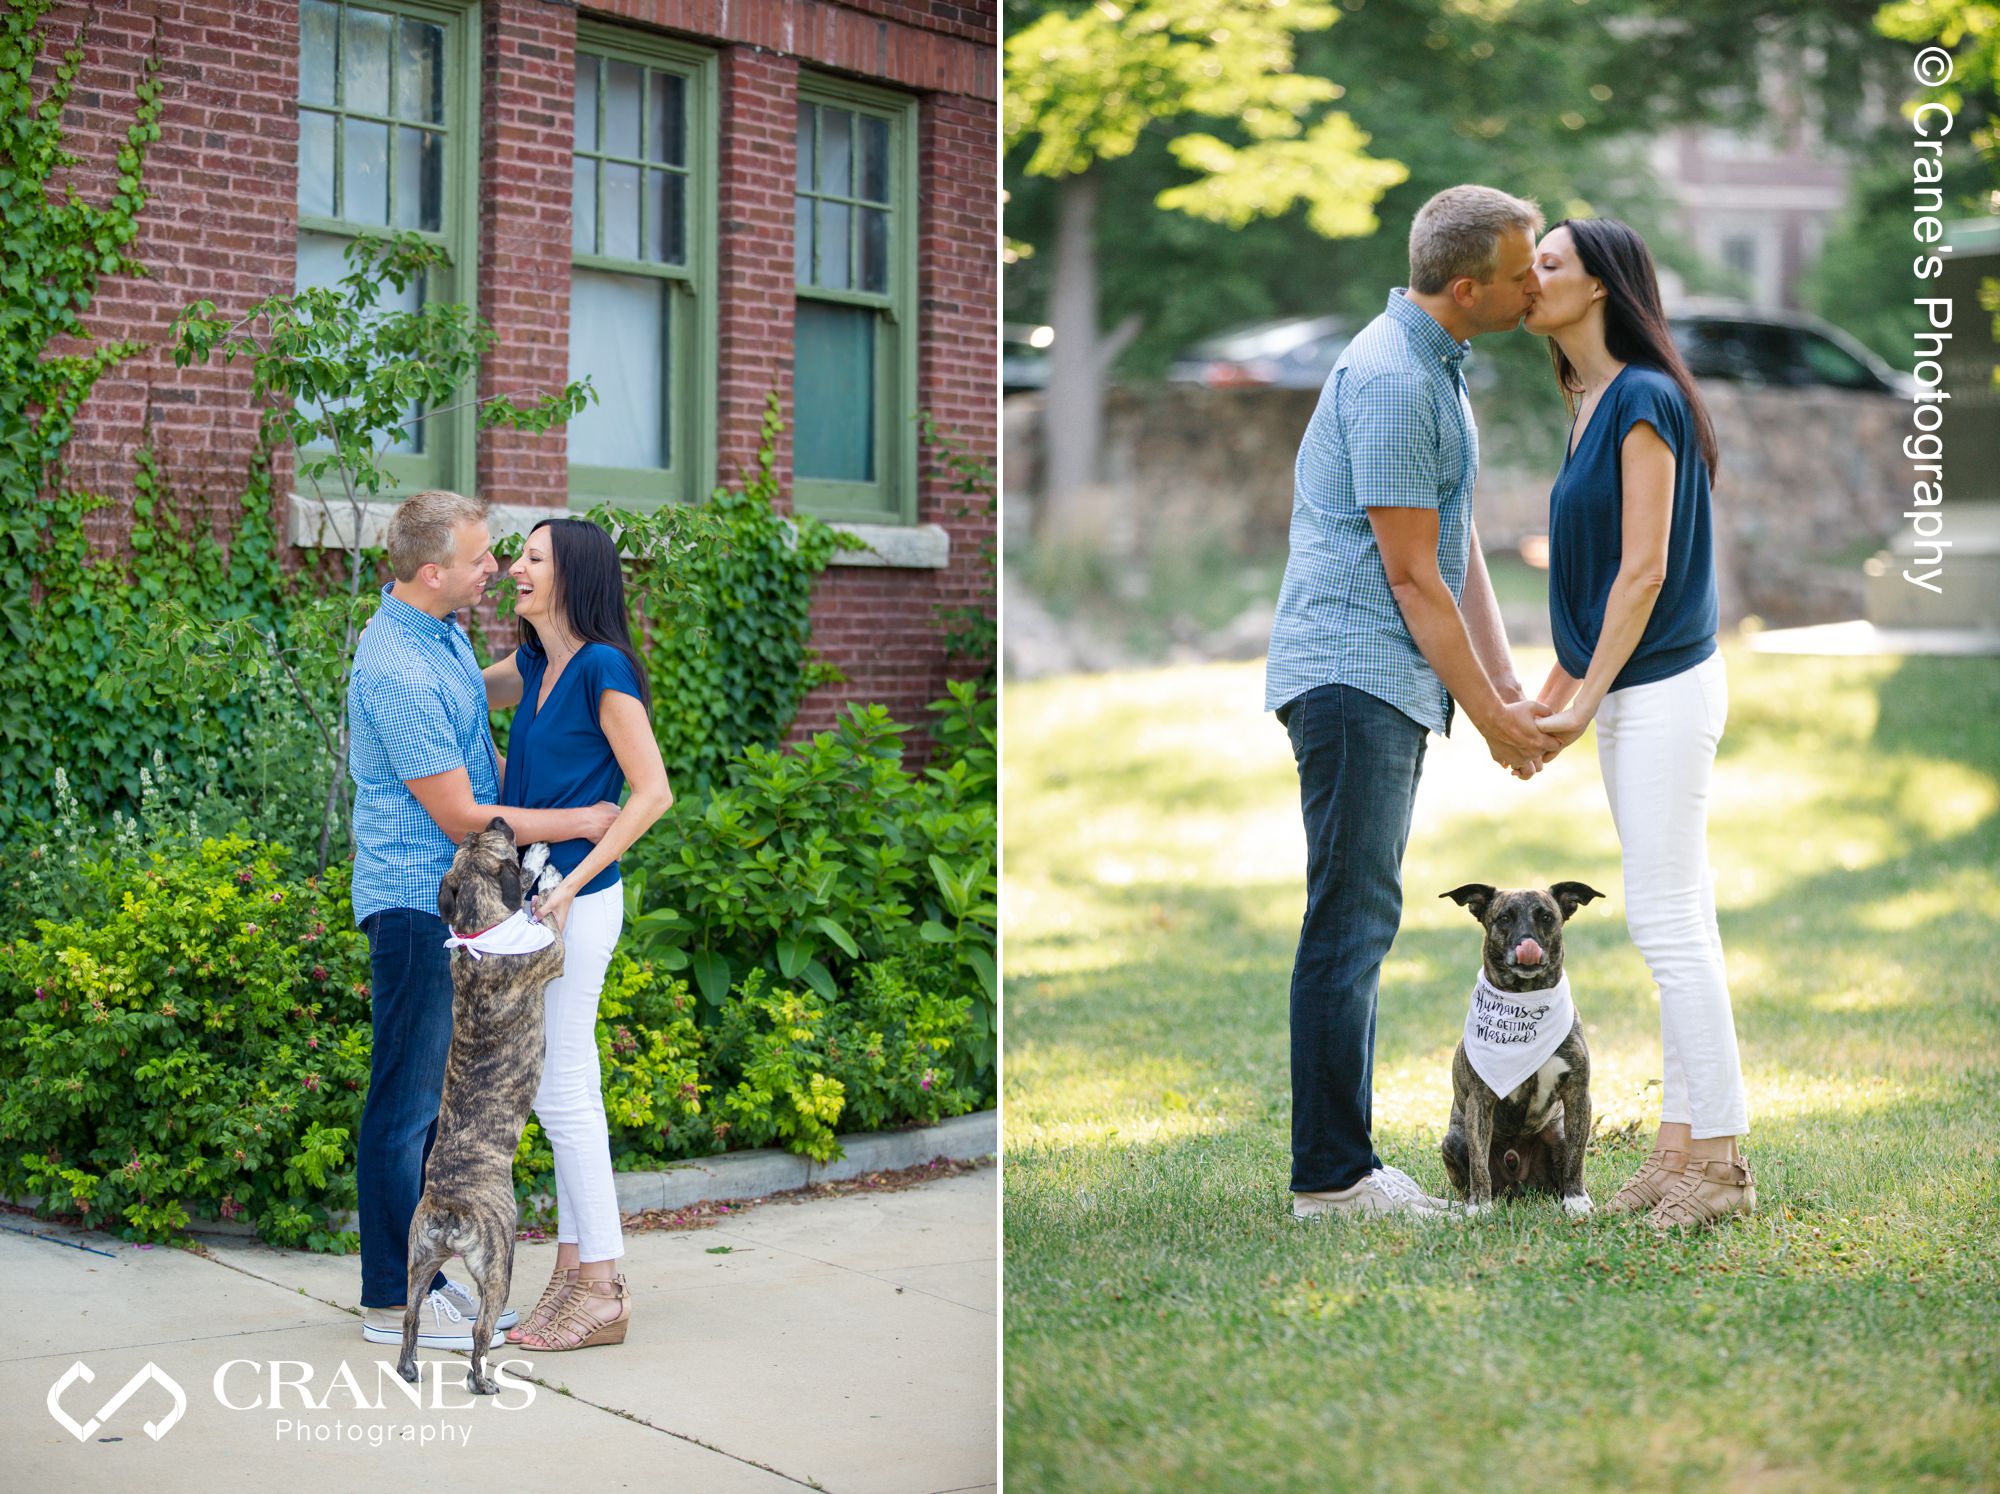  A summer Chicago engagement session with a dog wearing a bandana